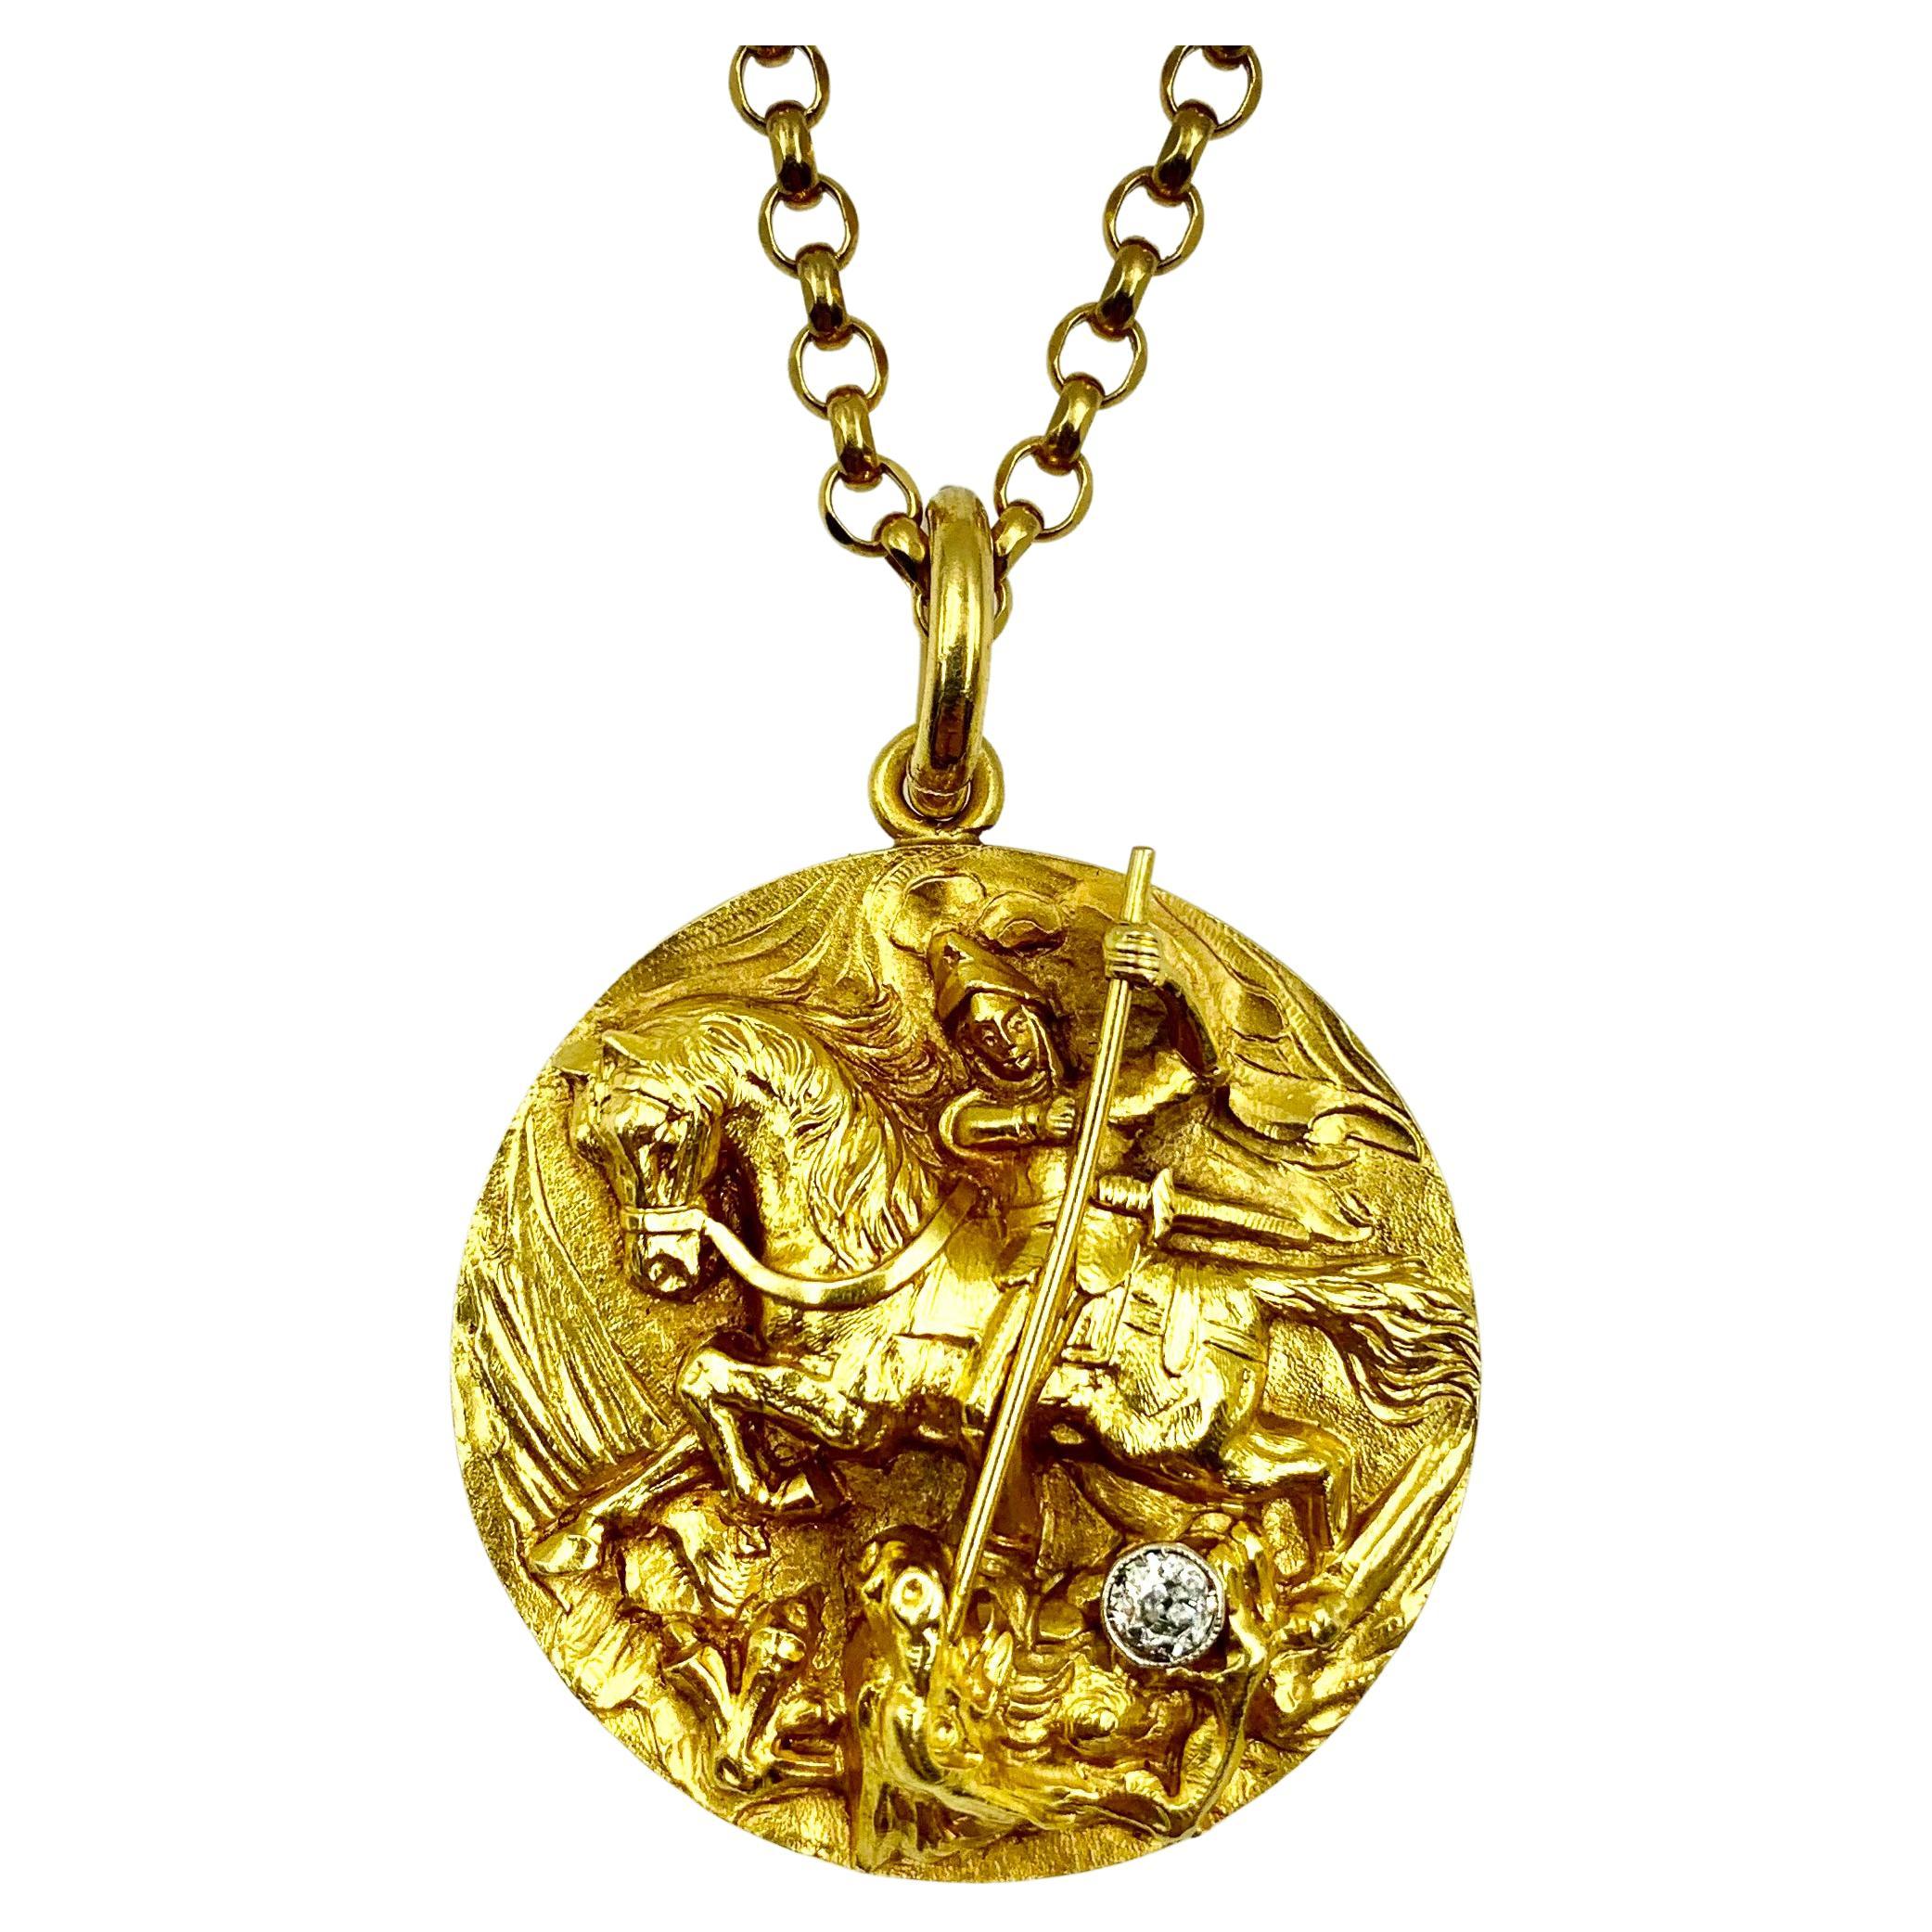 Large Saint George and the Dragon 18K Gold, Diamond High Relief Locket on Chain